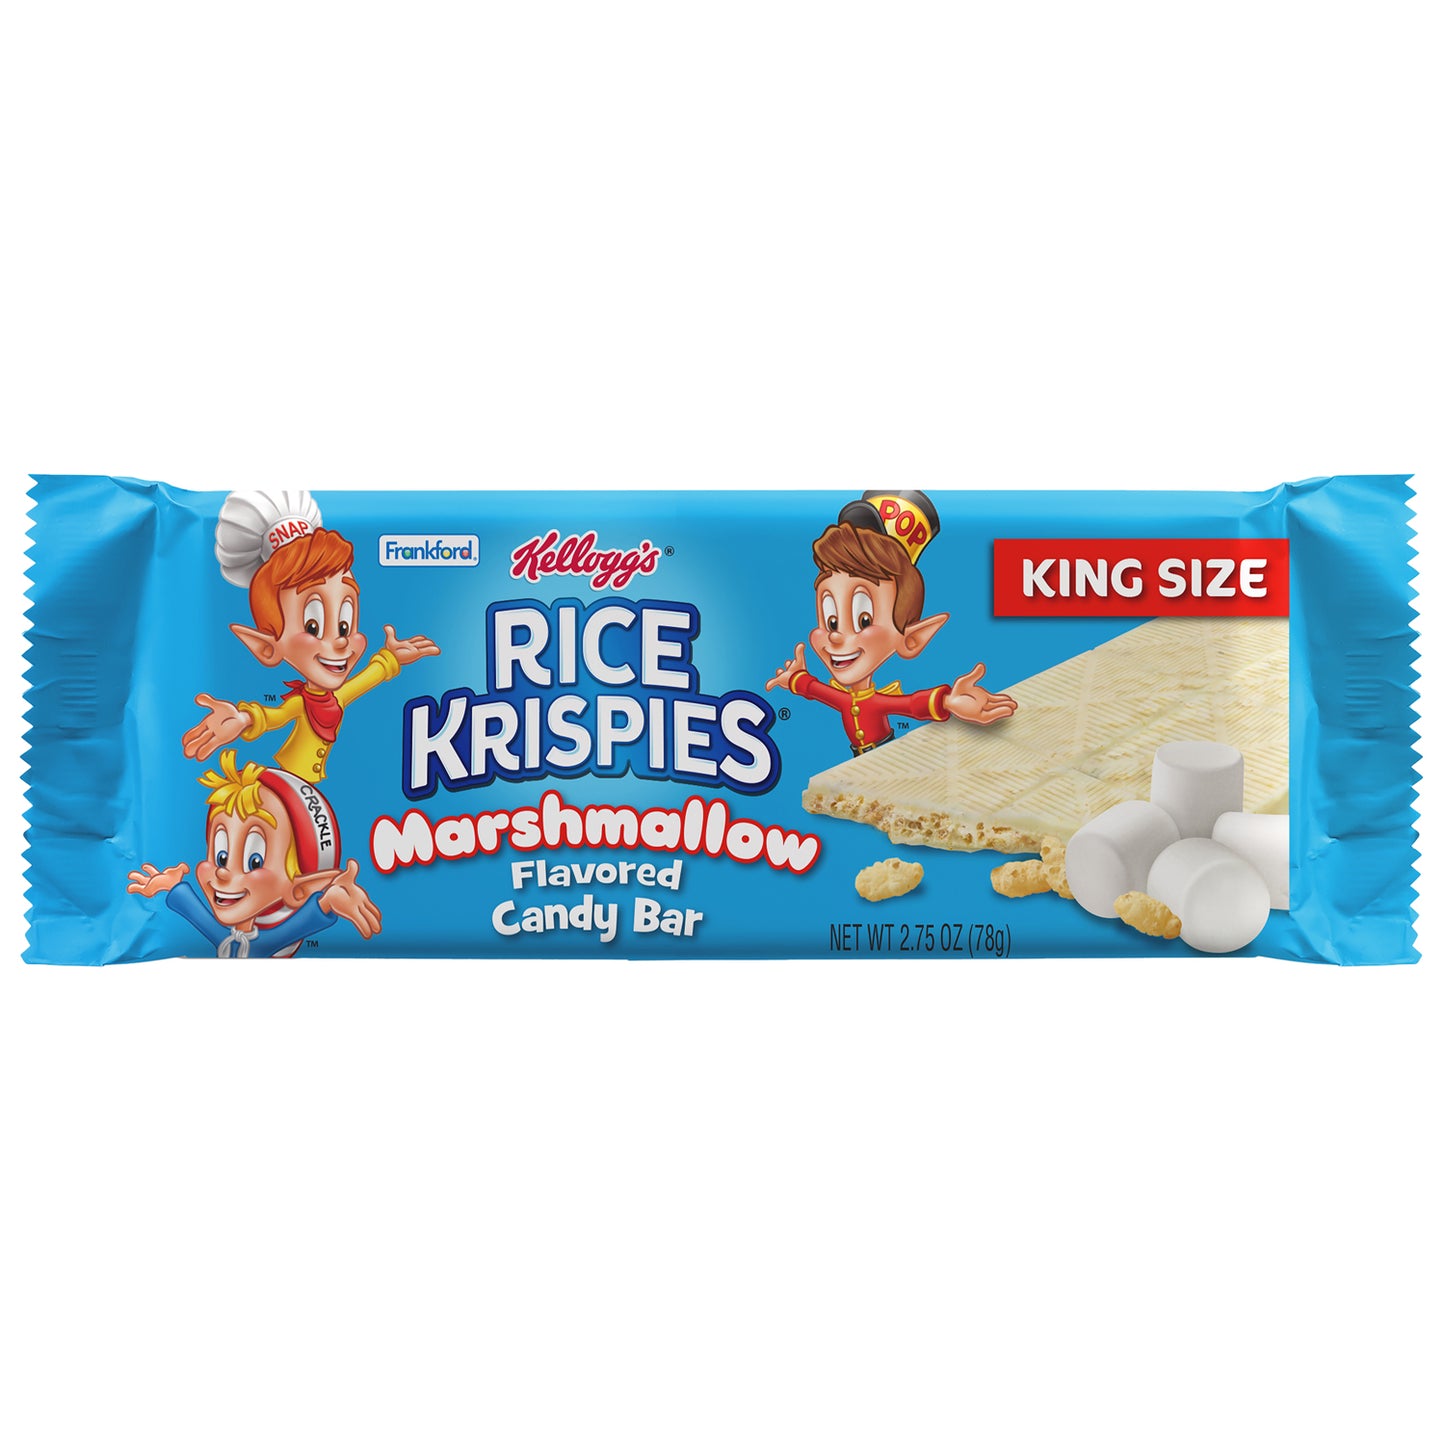 Blue candy bar wrapper with Rice Krispies carton mascots Snap, Crackle, and Pop